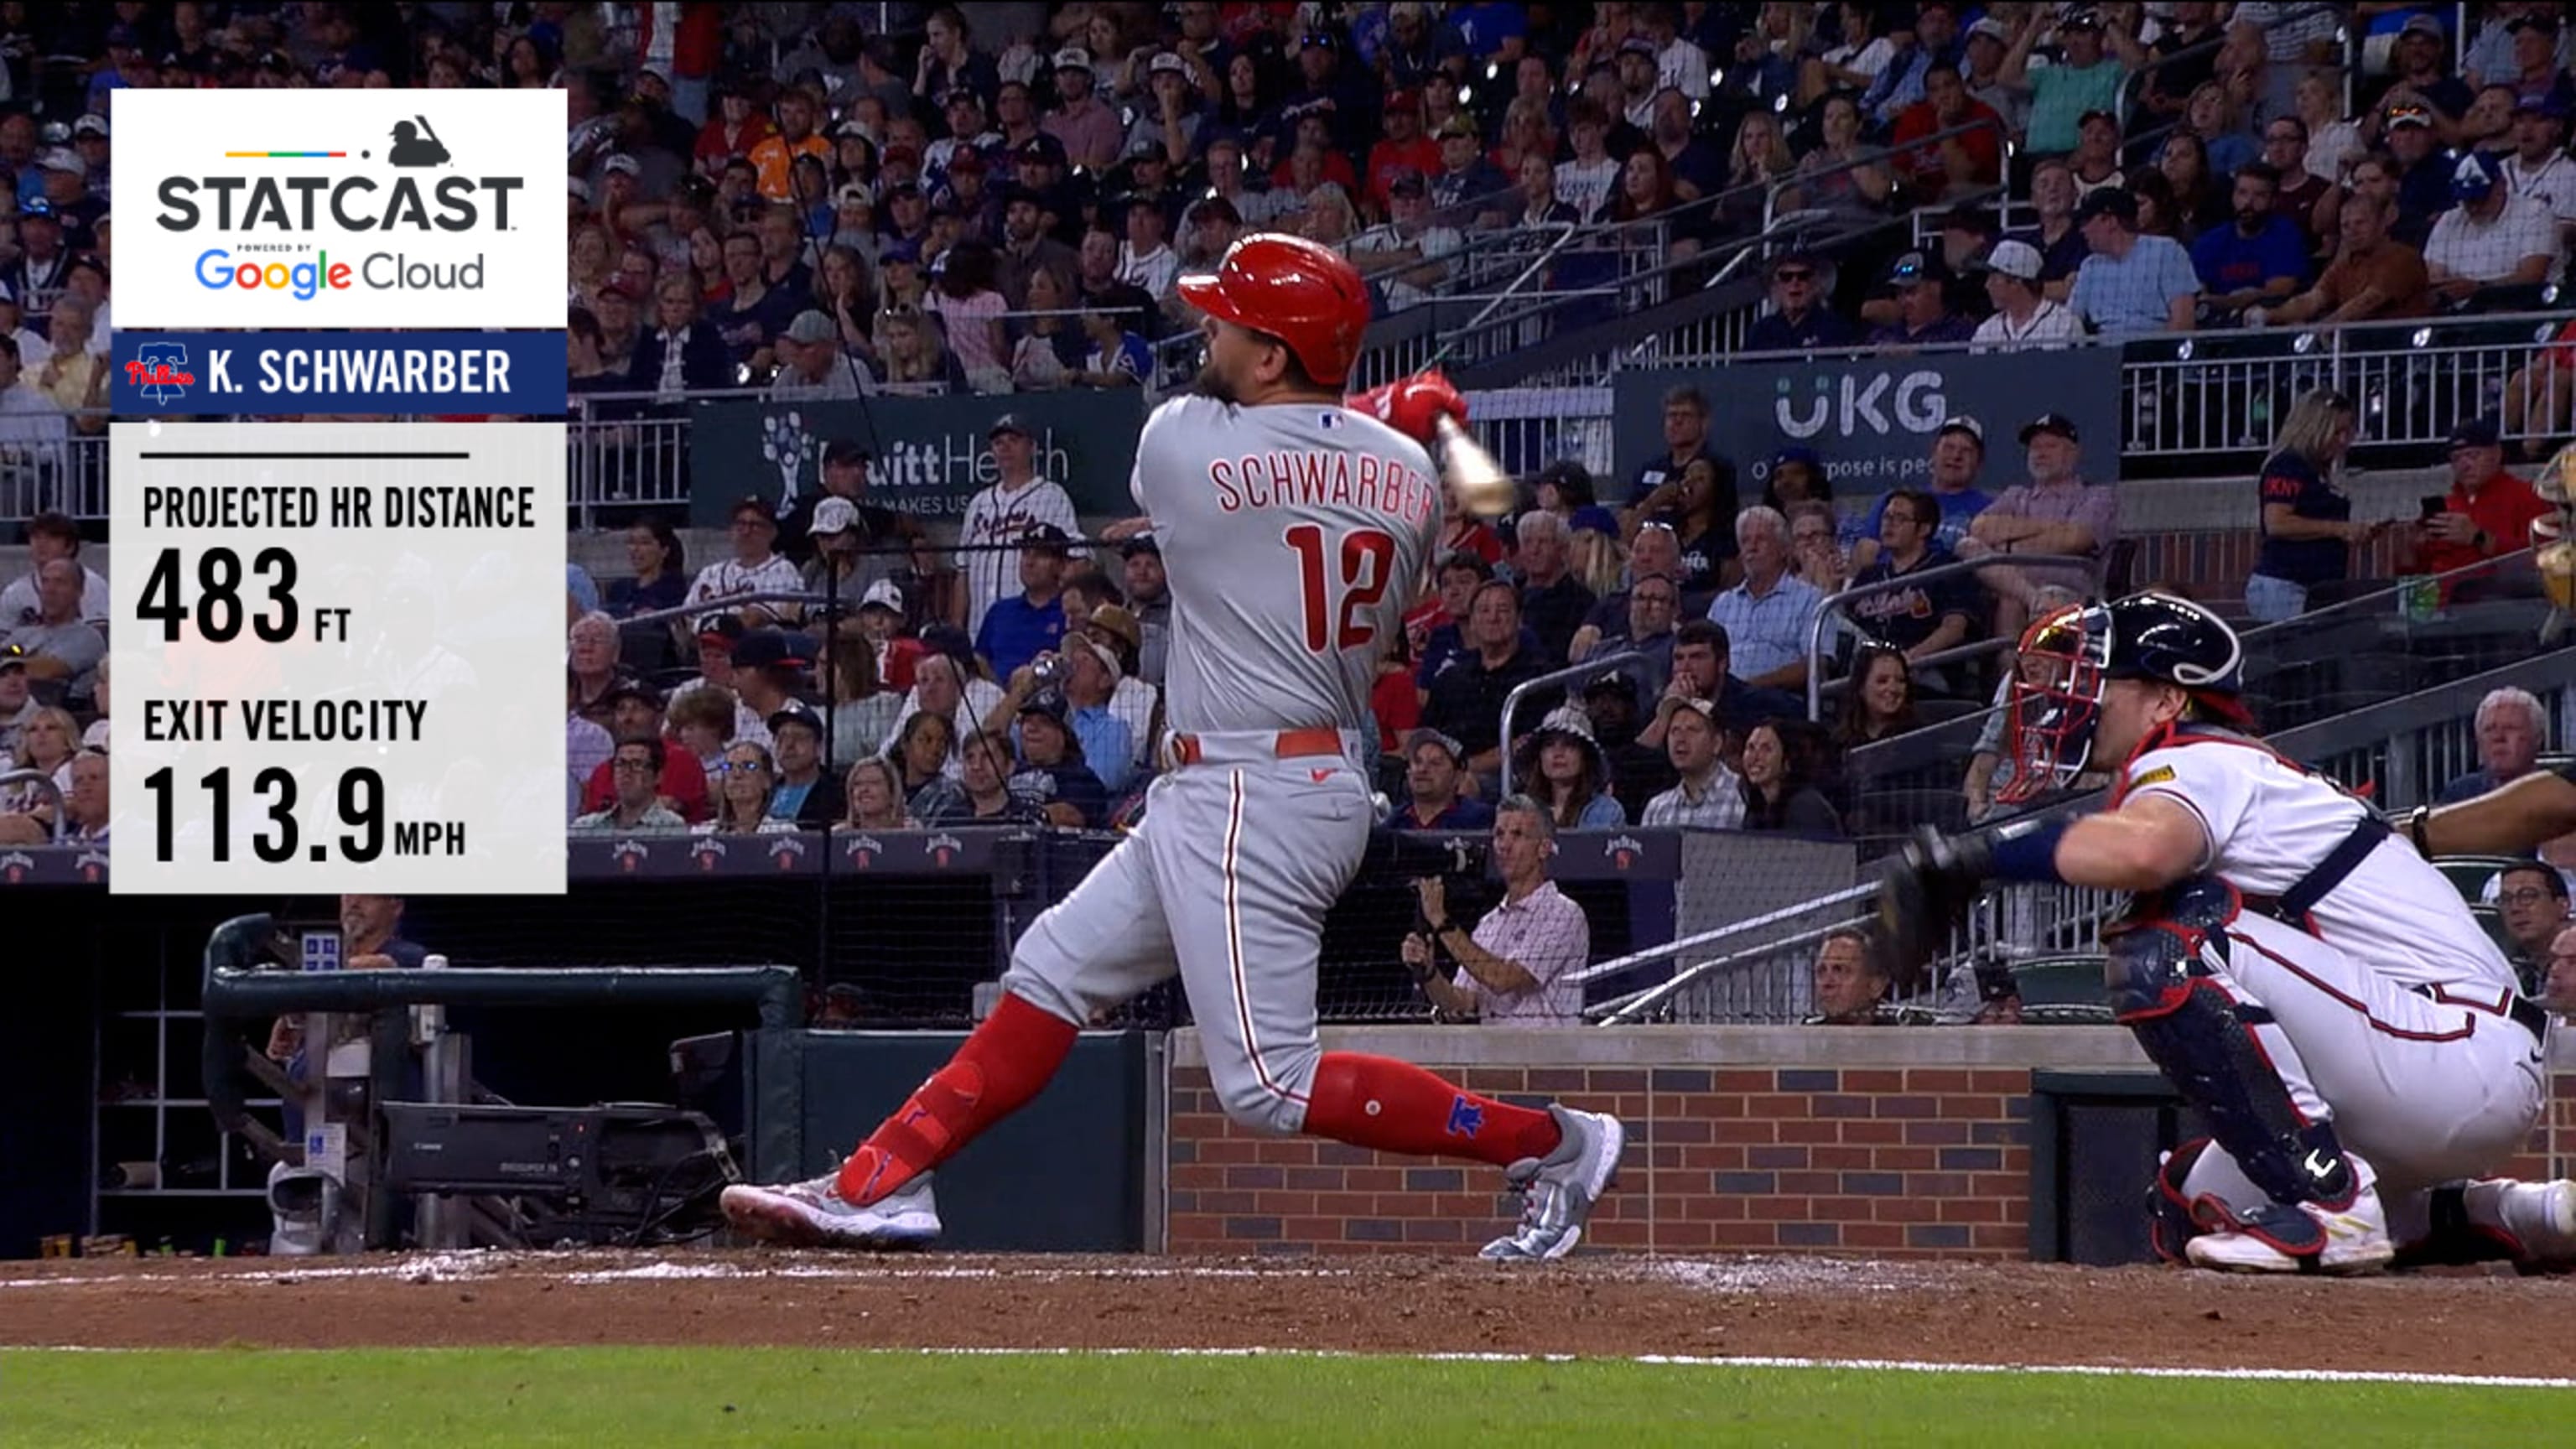 Schwarber homers again at Petco Park as the Phillies beat the